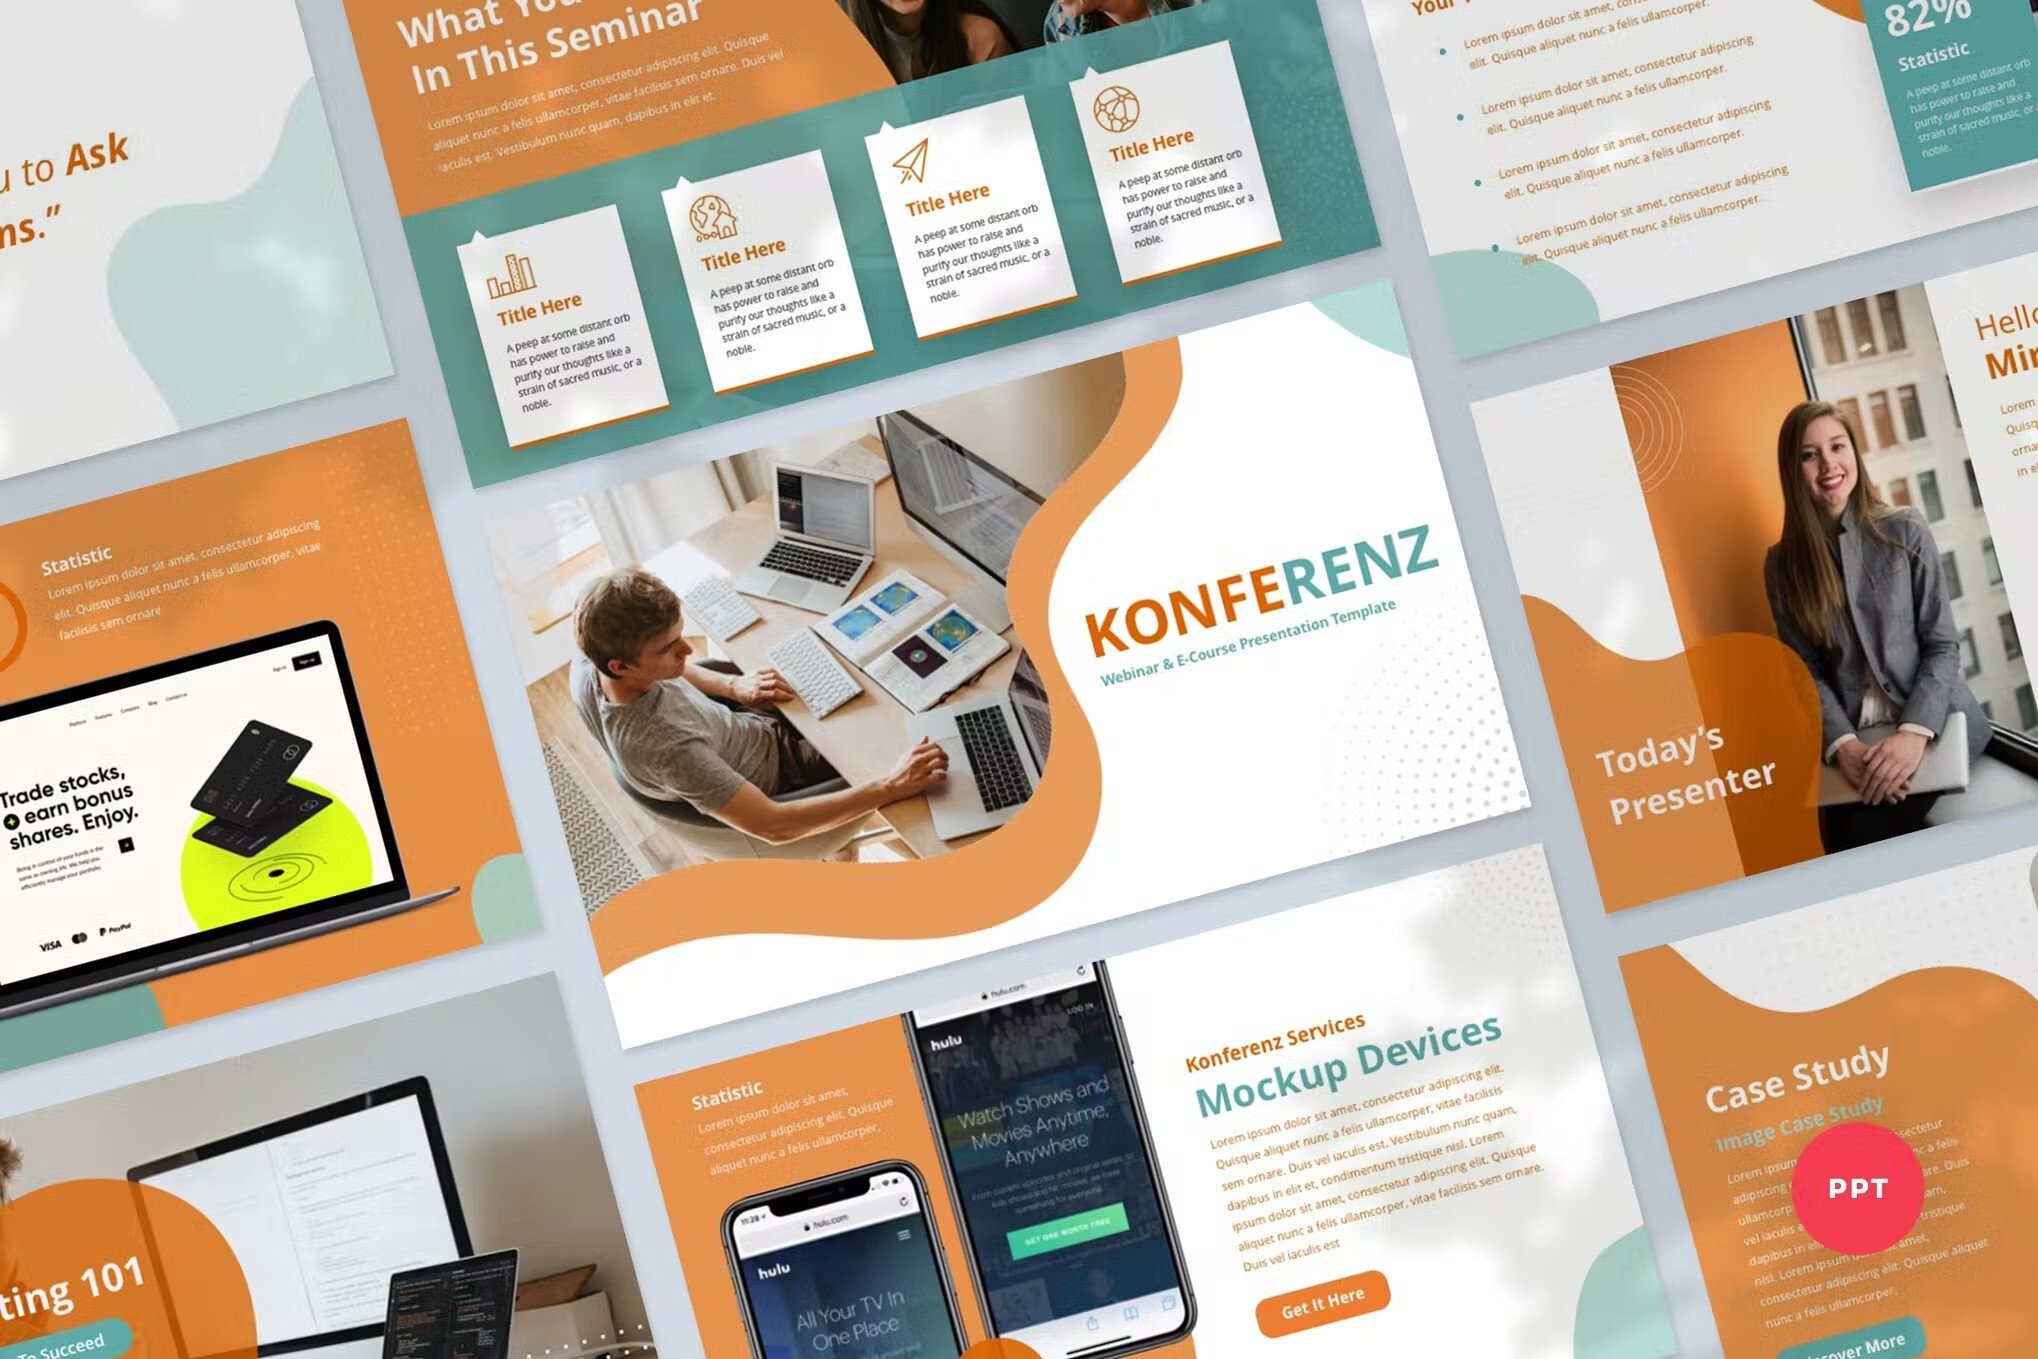 training-powerpoint-template-13 20+ Best Training & eLearning PowerPoint Templates (Education PPTs) design tips 